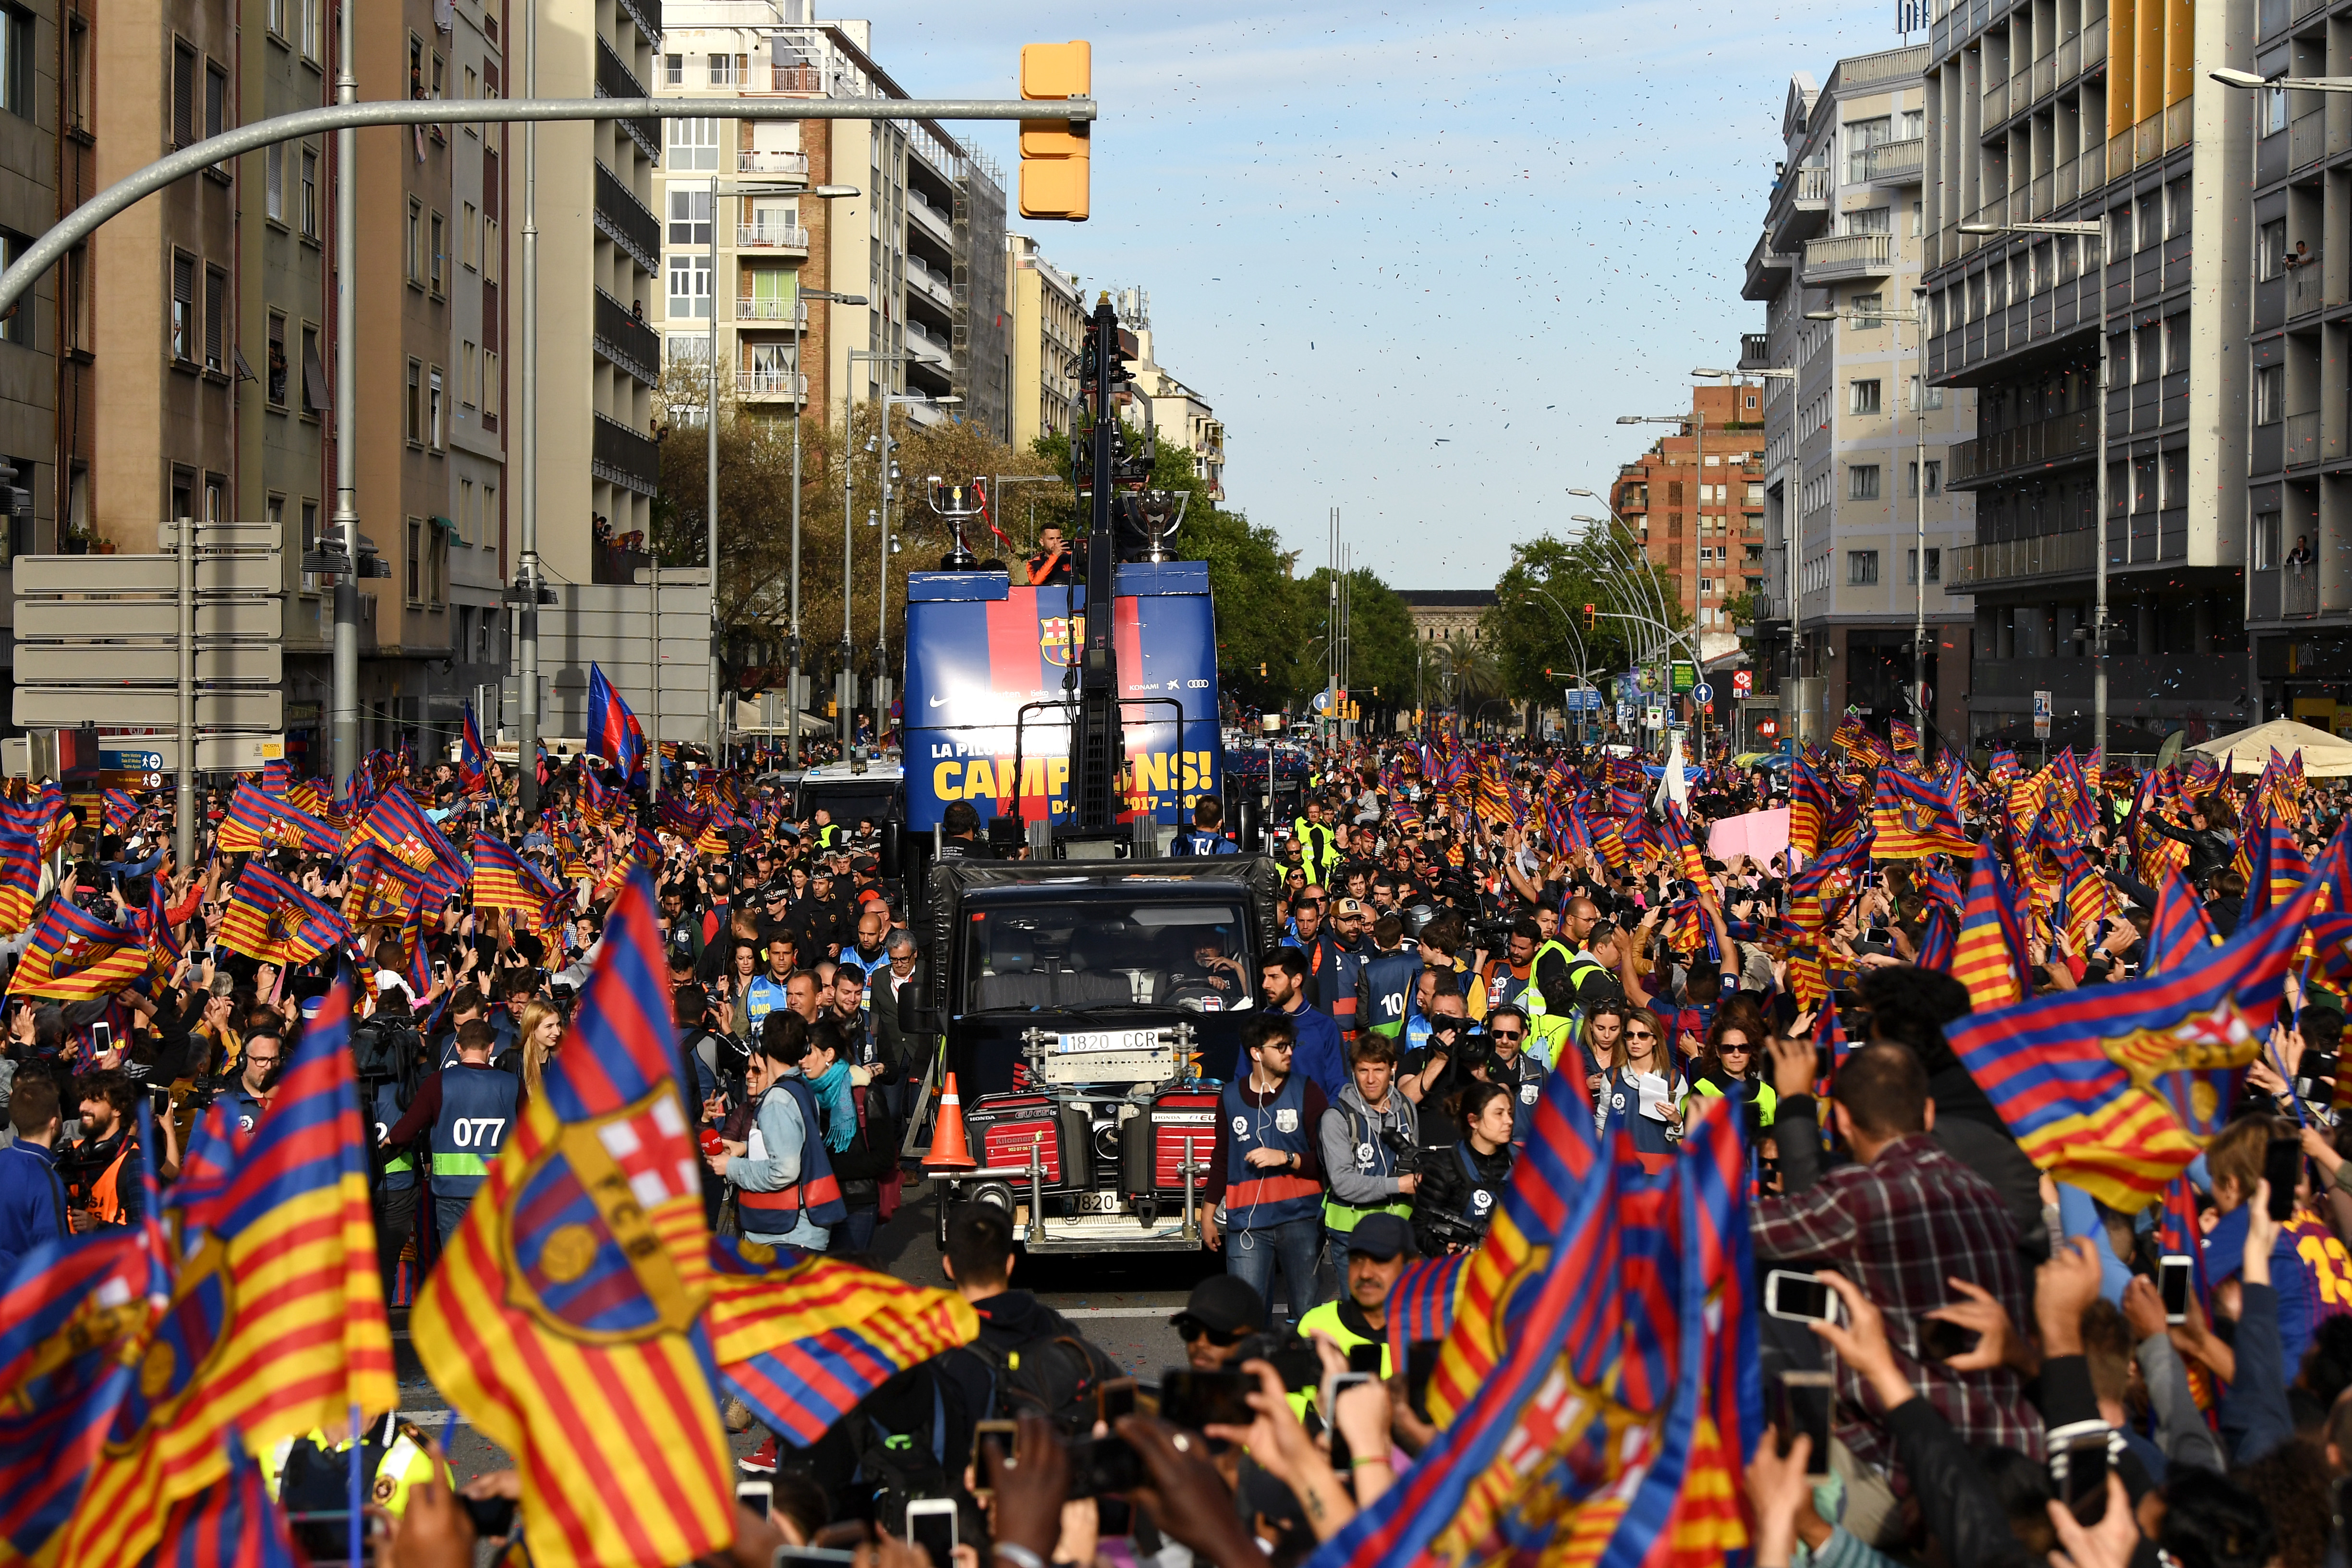 BARCELONA, SPAIN - APRIL 30:  Barcelona supporters welcome players during the FC Barcelona Victory Parade in celebration of the La Liga and Copa Del Rey titles on April 30, 2018 in Barcelona, Spain.  (Photo by David Ramos/Getty Images)